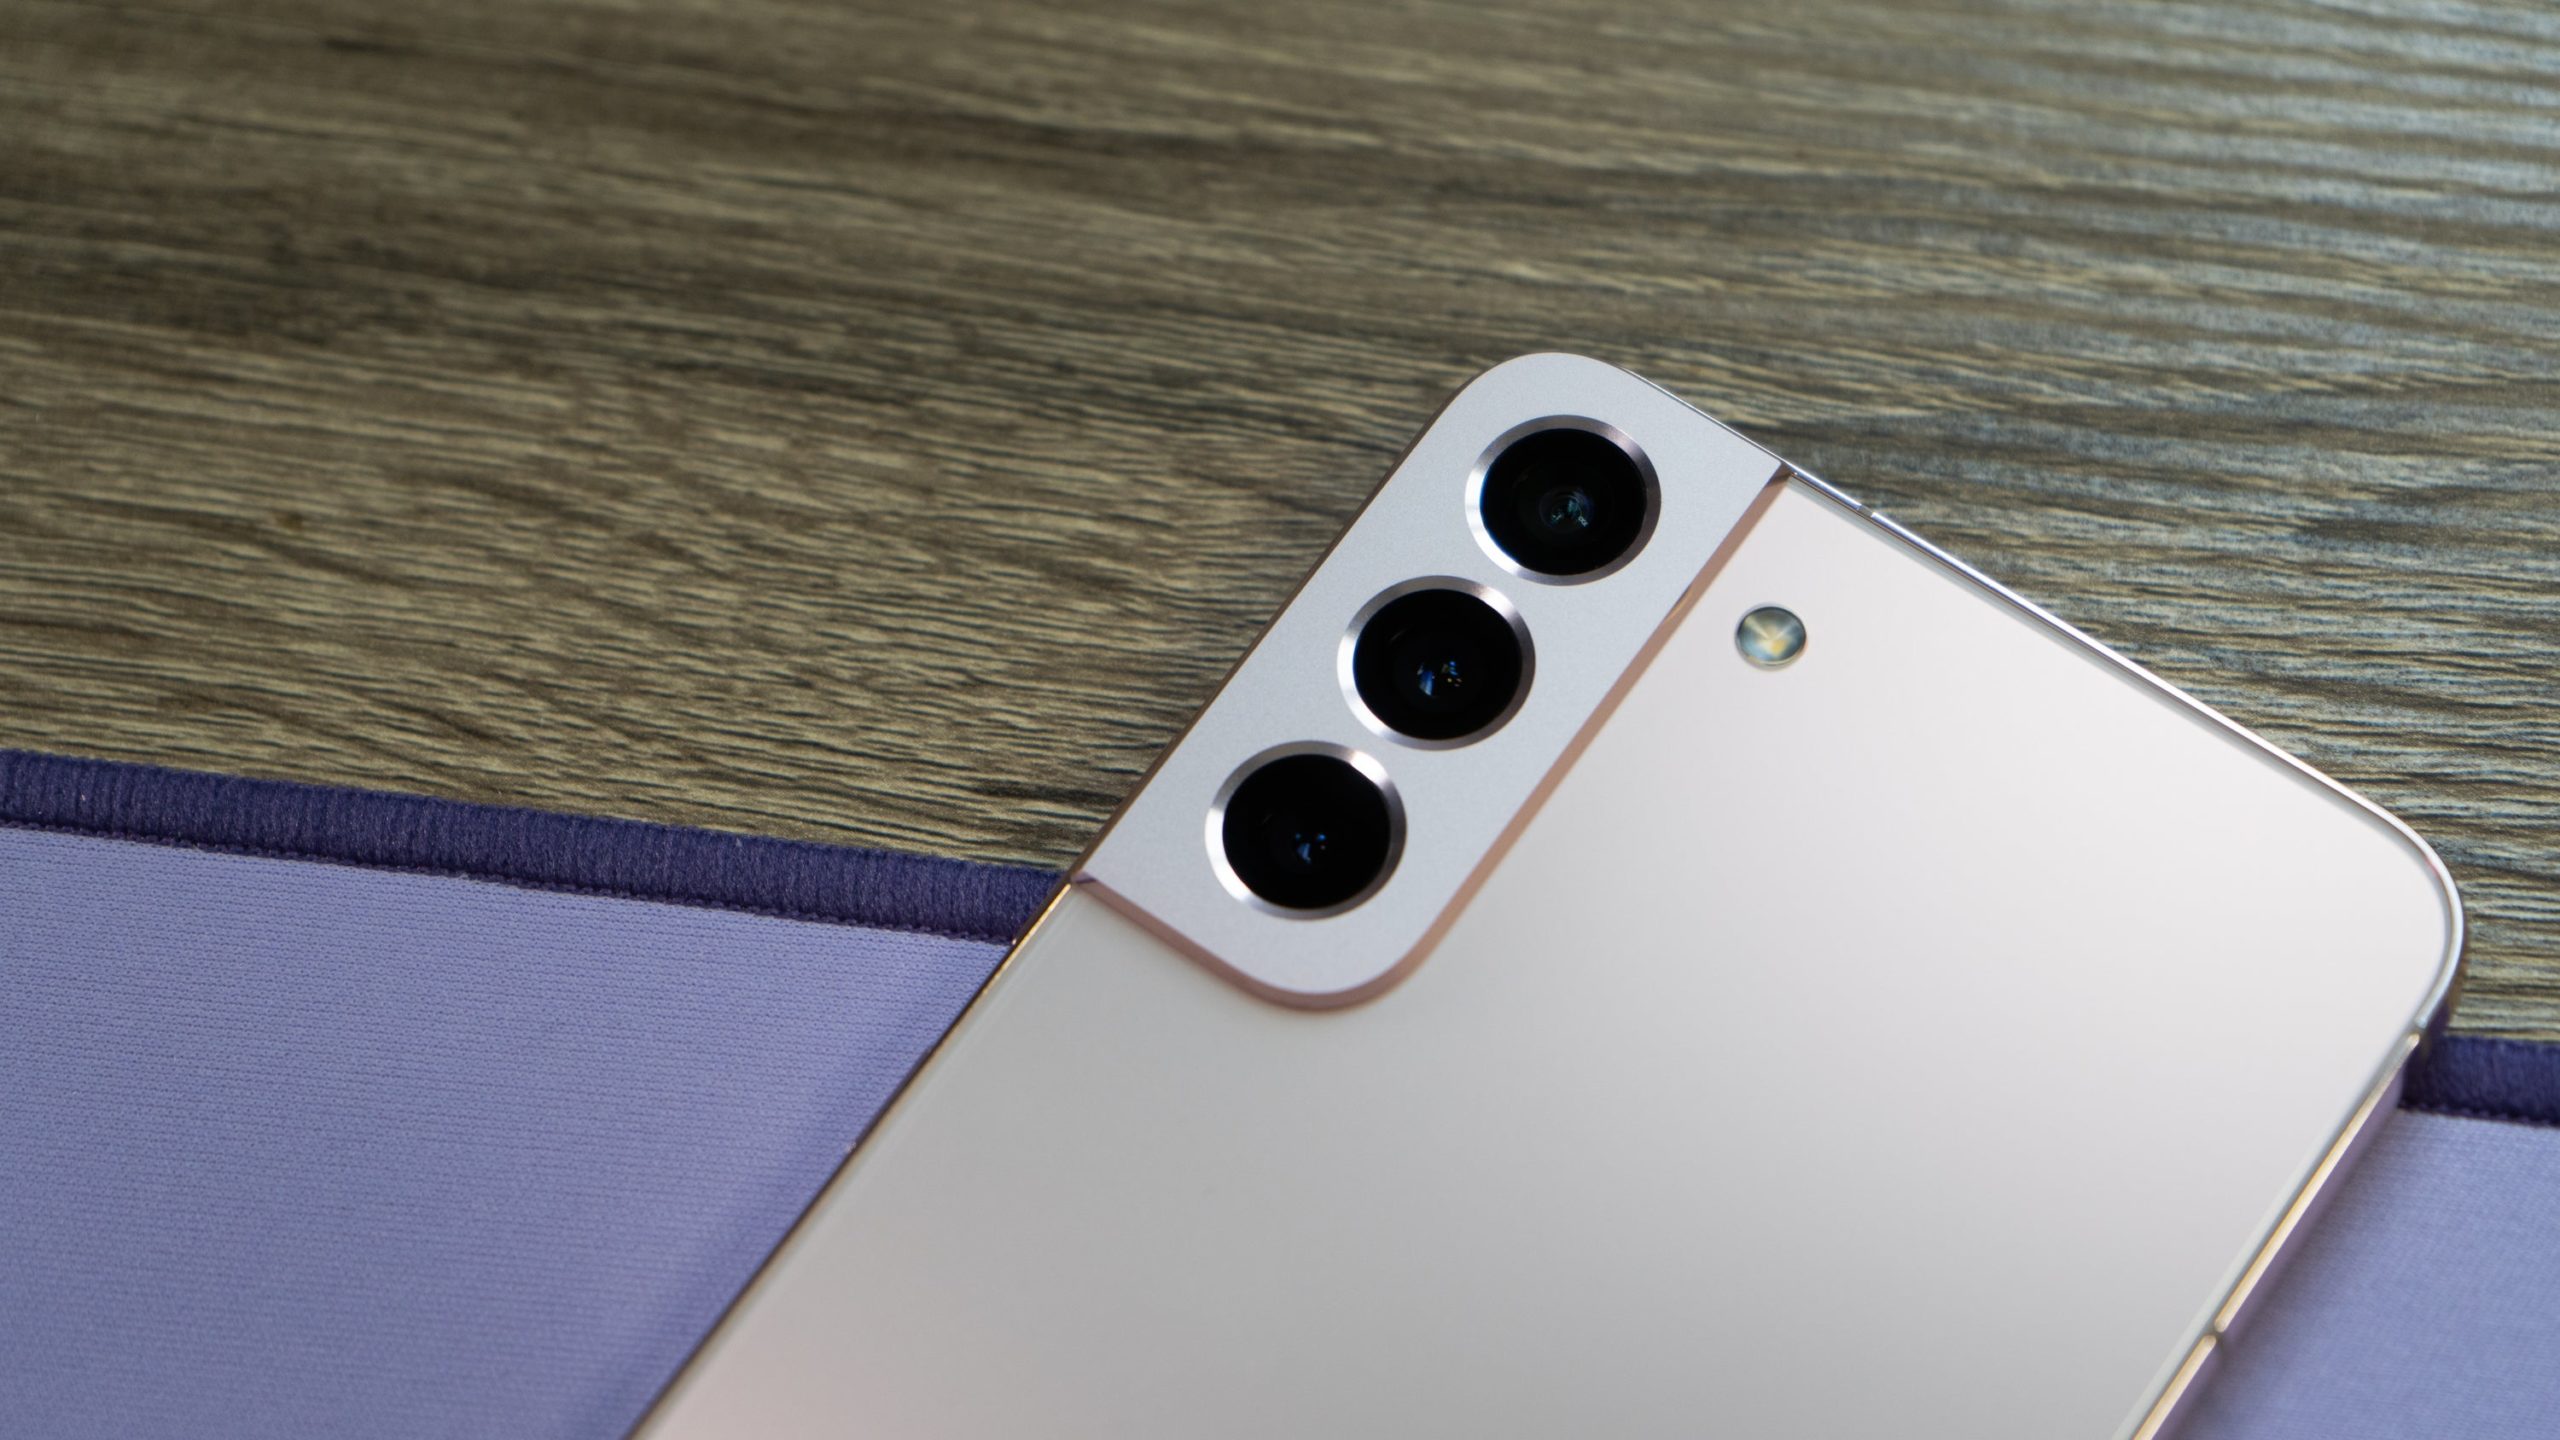 The three rear cameras include an ultra-wide-angle, a wide-angle, and a telephoto lens. (Image: Florence Ion / Gizmodo)